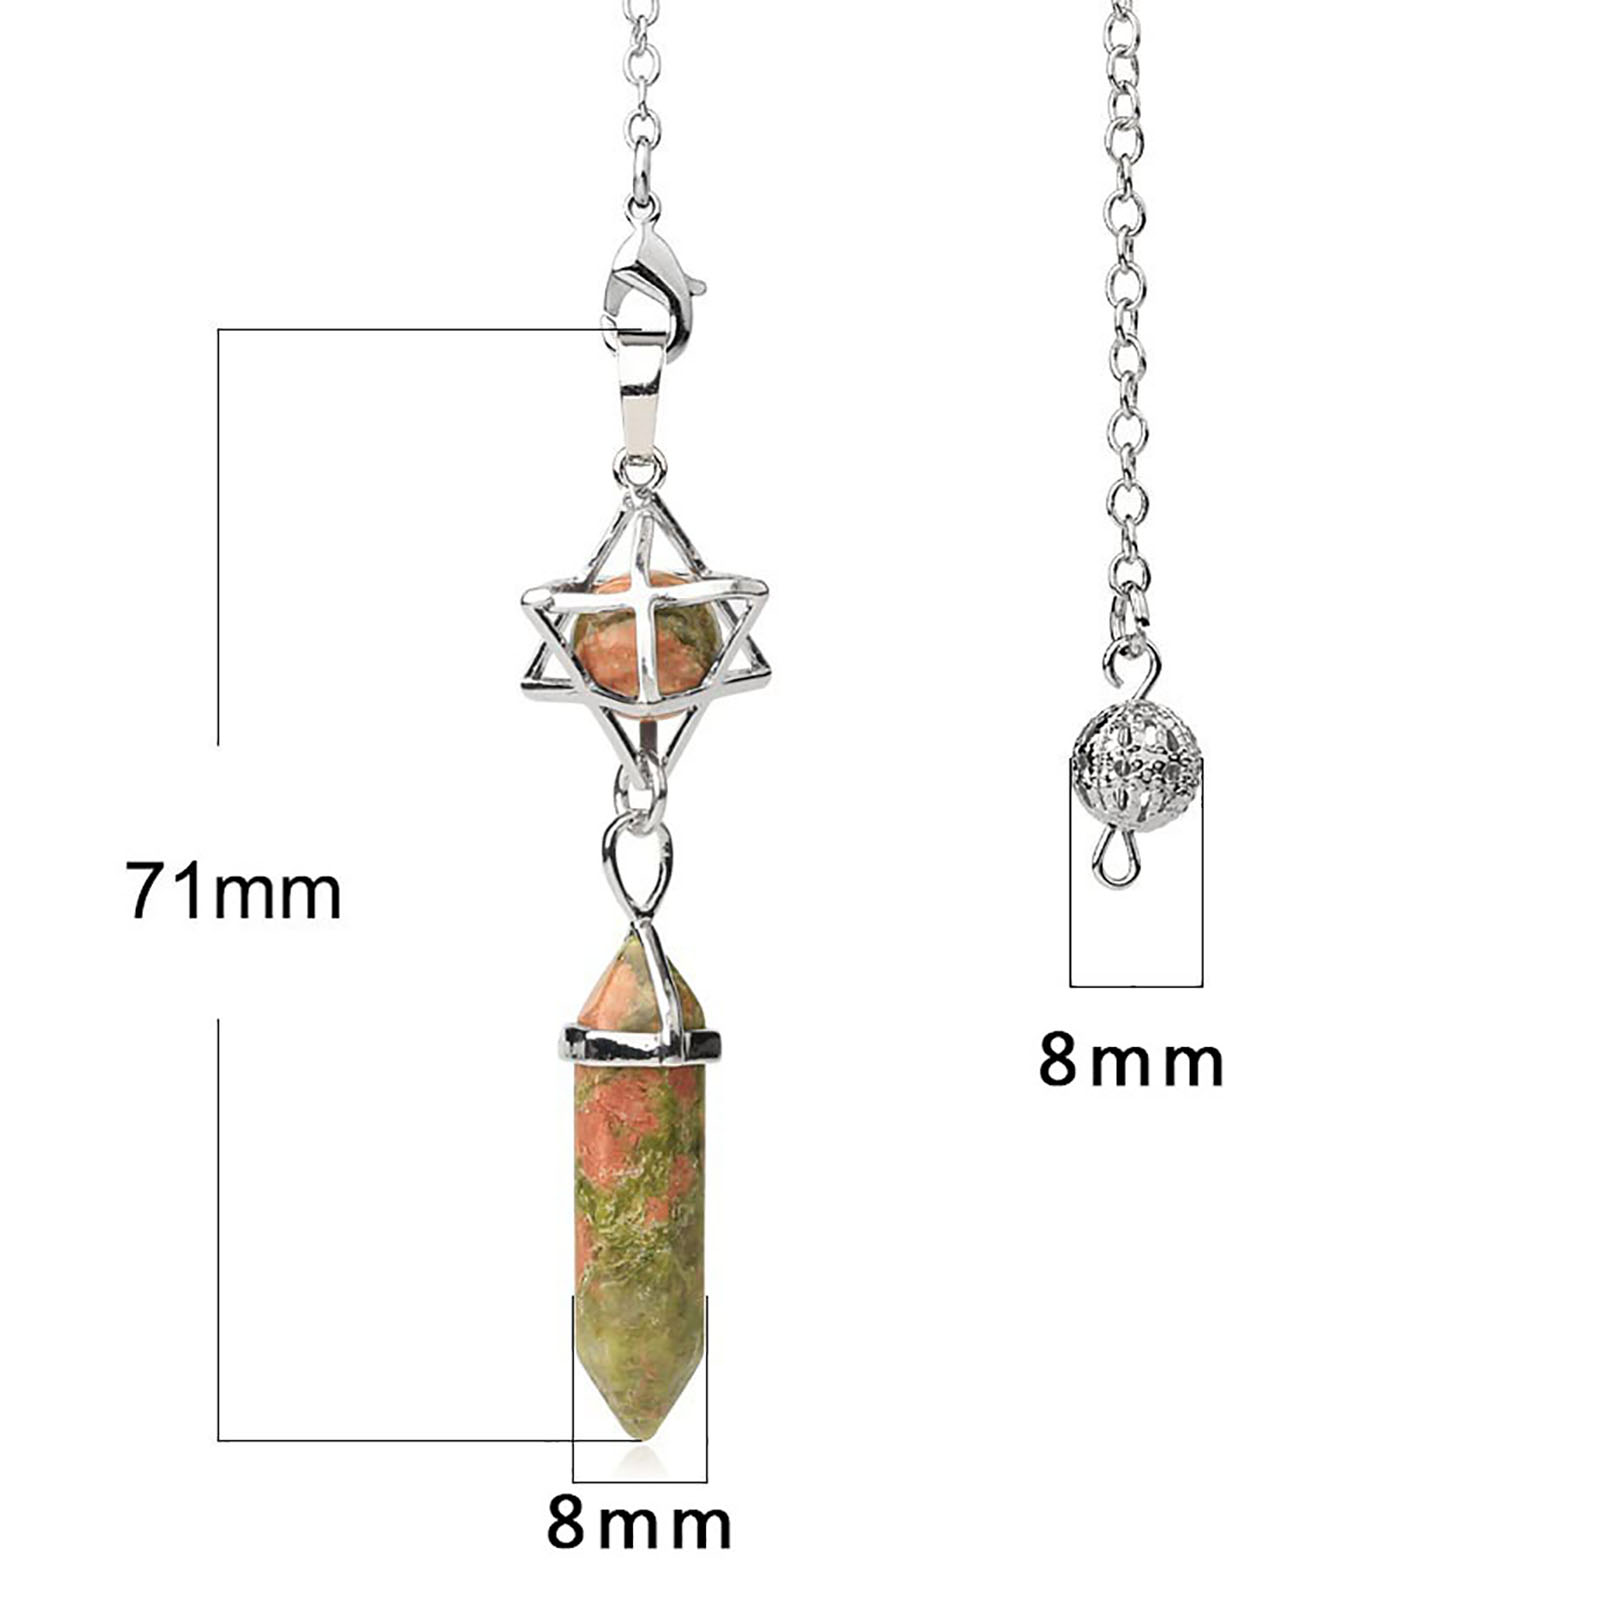 The pendant is about 70mm high, hexagonal column 8mm wide, and the tail 8mm bead